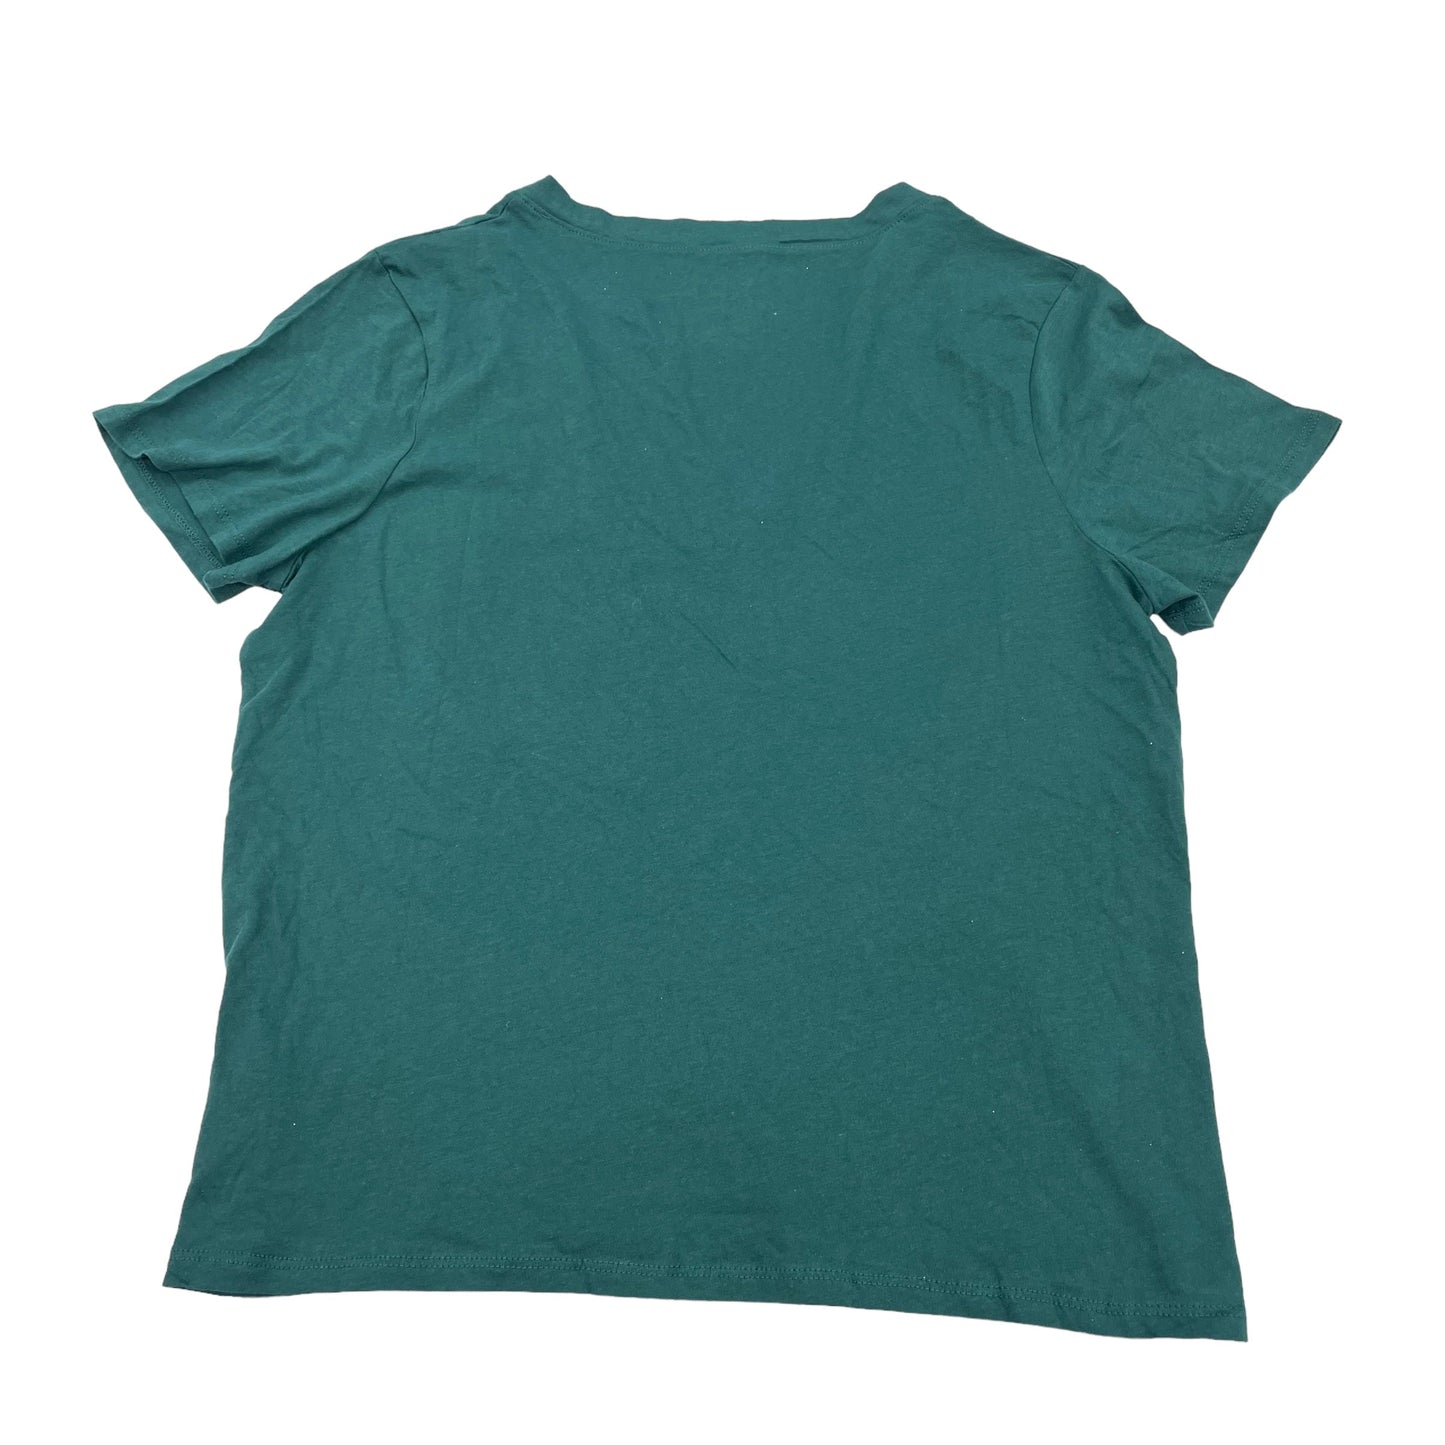 Teal Top Short Sleeve A New Day, Size M